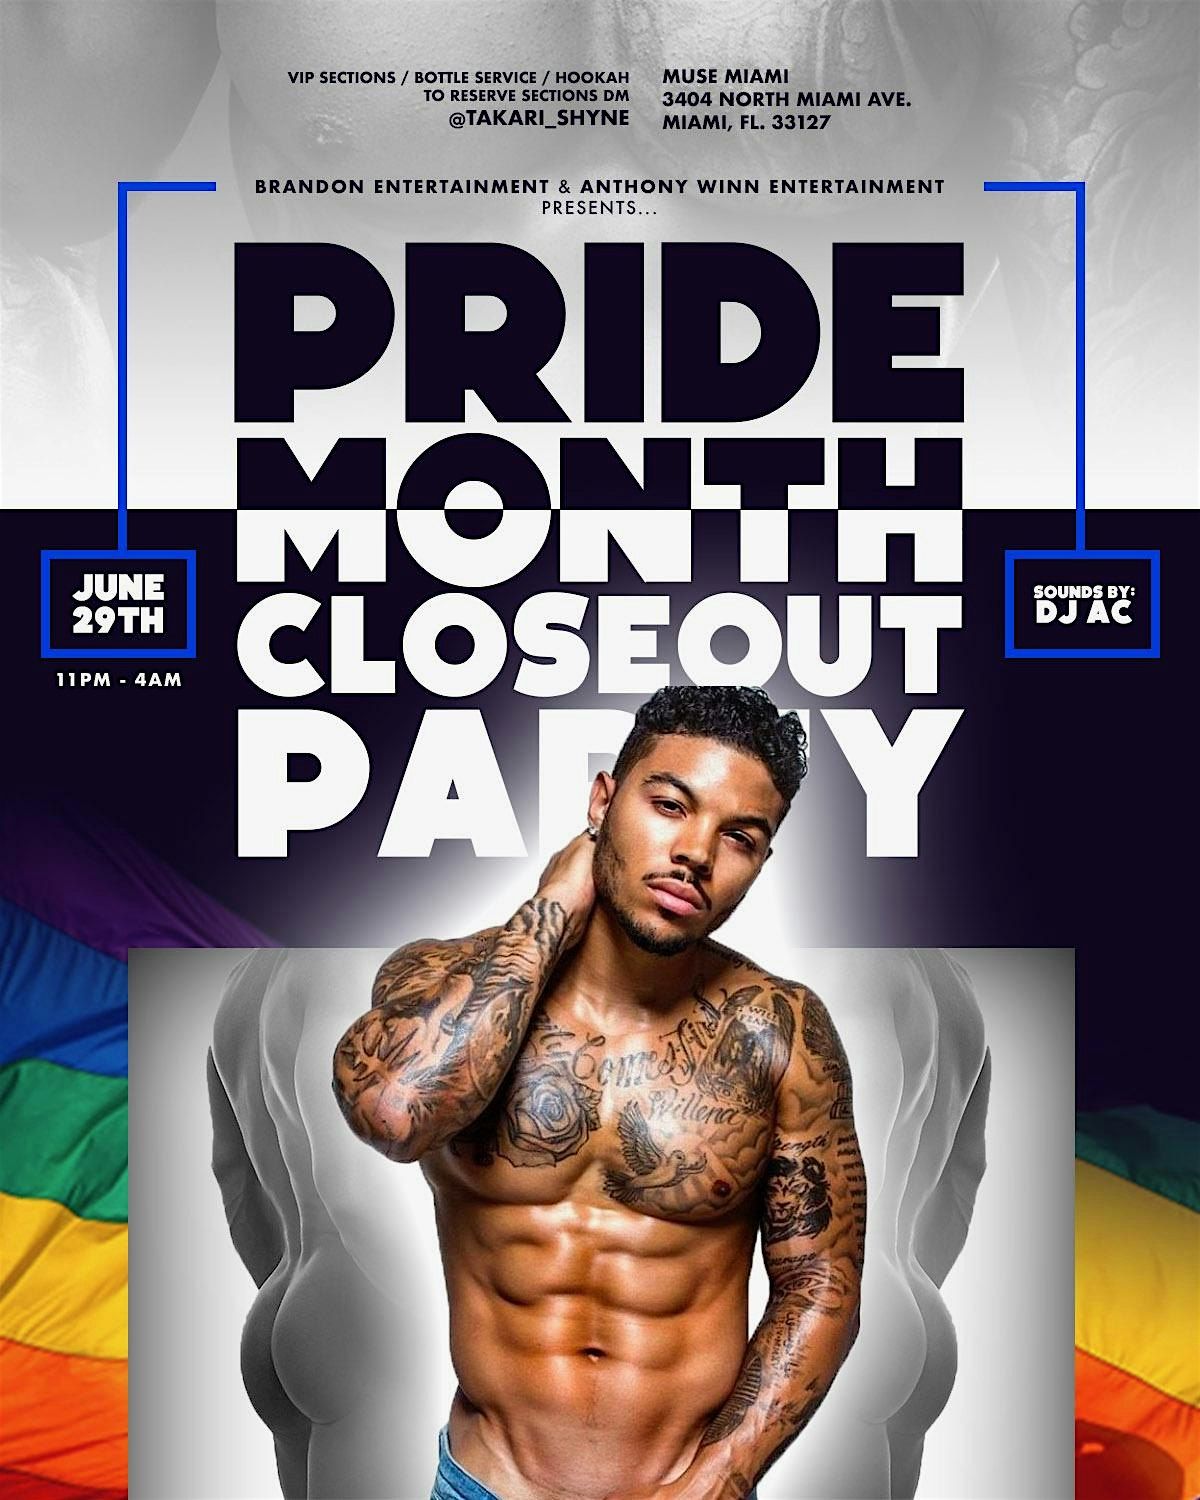 PRIDE MONTH CLOSE OUT PARTY